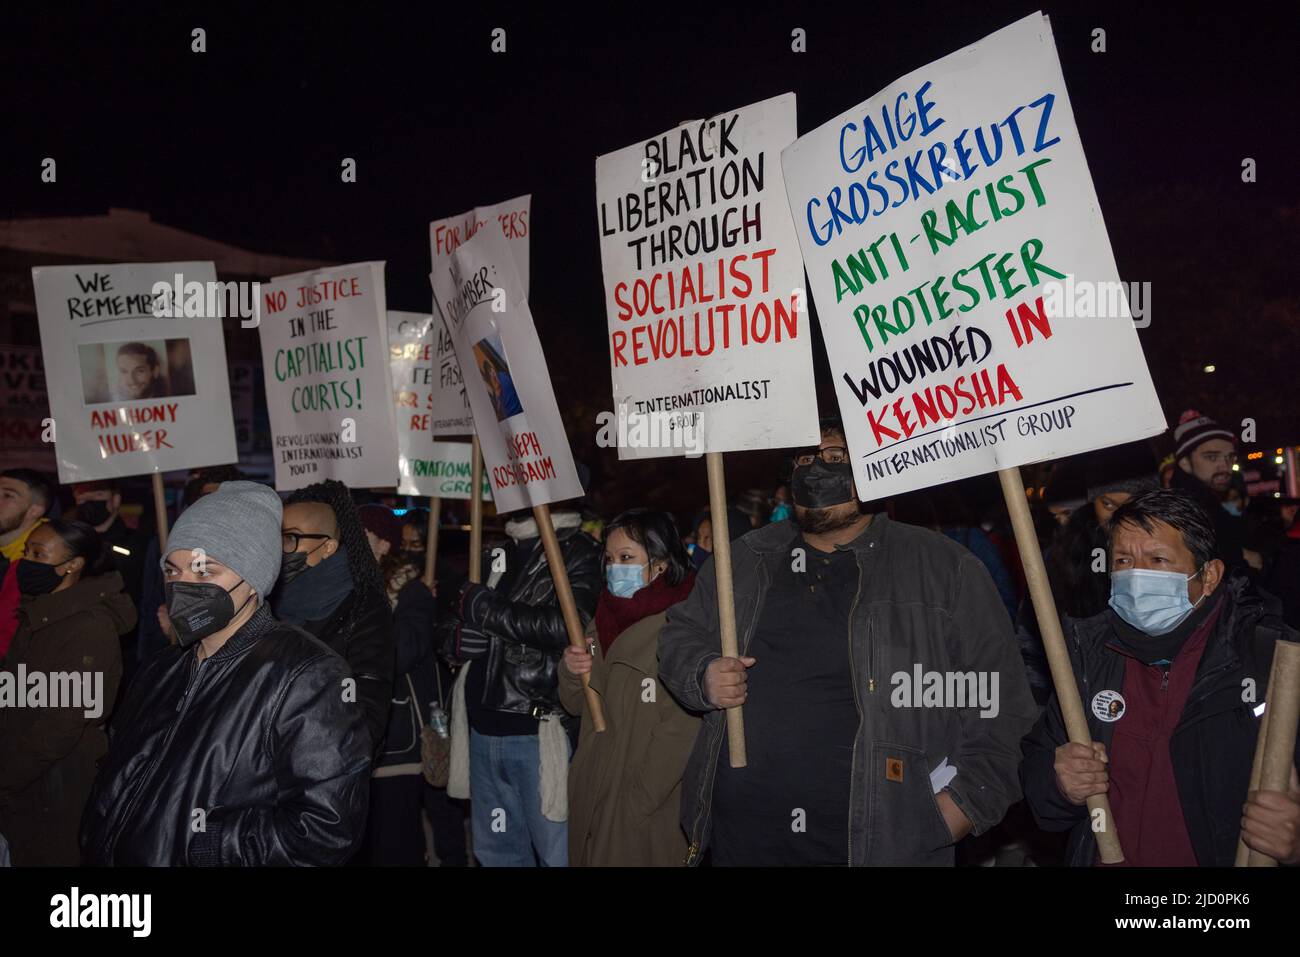 BROOKLYN, N.Y. – November 19, 2021: Demonstrators gather in Brooklyn to protest the verdict in the trial of Kyle Rittenhouse in Kenosha, Wisconsin. Stock Photo